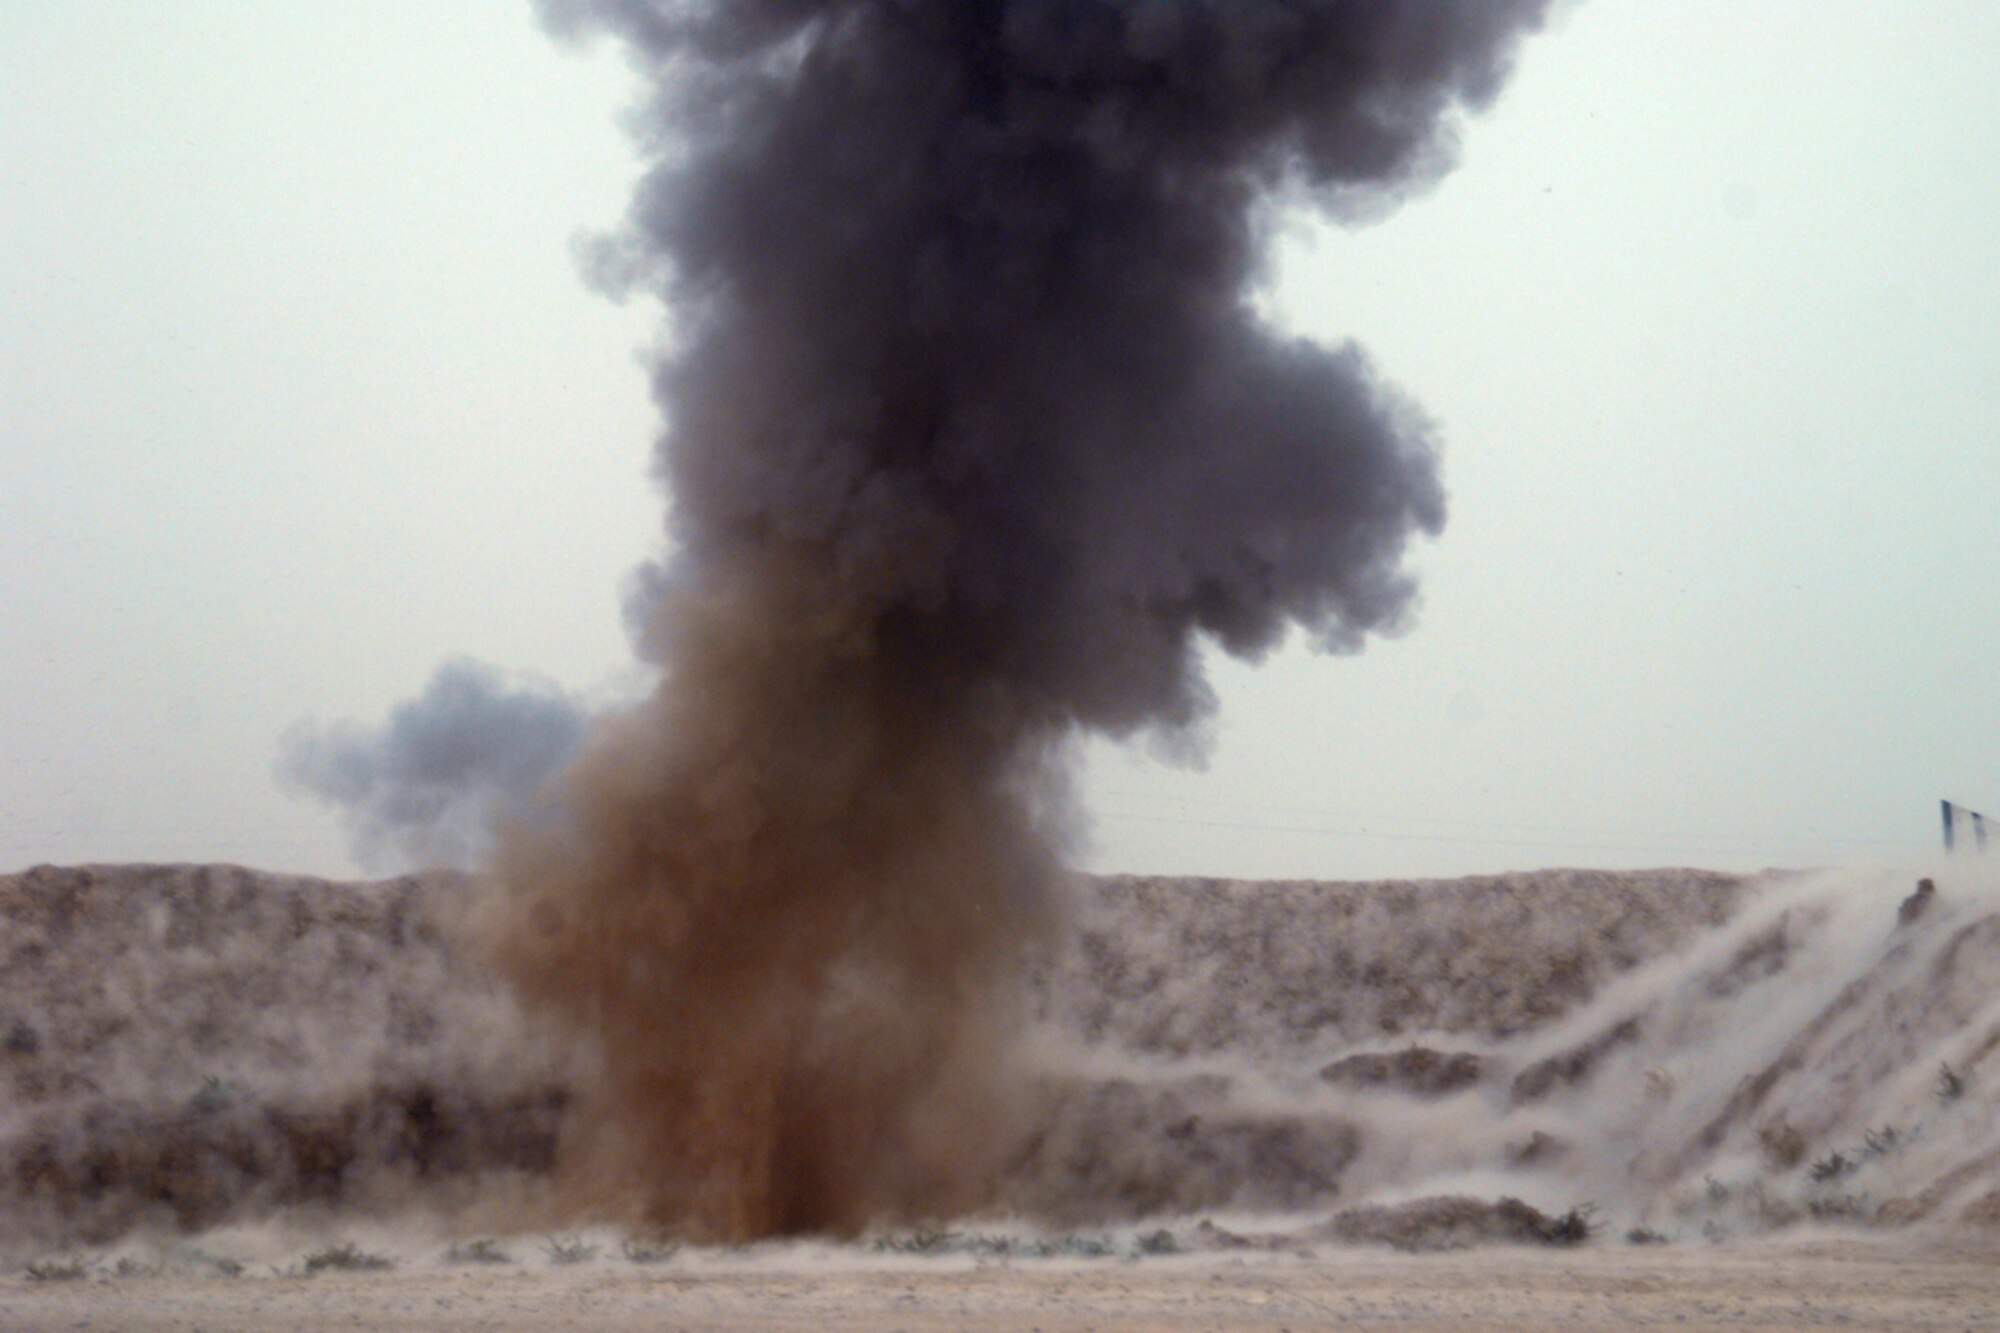 KIRKUK REGIONAL AIR BASE, Iraq – A controlled detonation at FOB McHenry by members of the 506th Air Expeditionary Group Explosive Ordnance Disposal flight destroys insurgent ordnance Sept 15.  Six 506th EOD Airmen are embedded with soldiers of the Army’s 10th Mountain Division at FOB McHenry where they perform route clearance duties. (U.S. Air Force photo/Tech. Sgt. Jeff Walston)